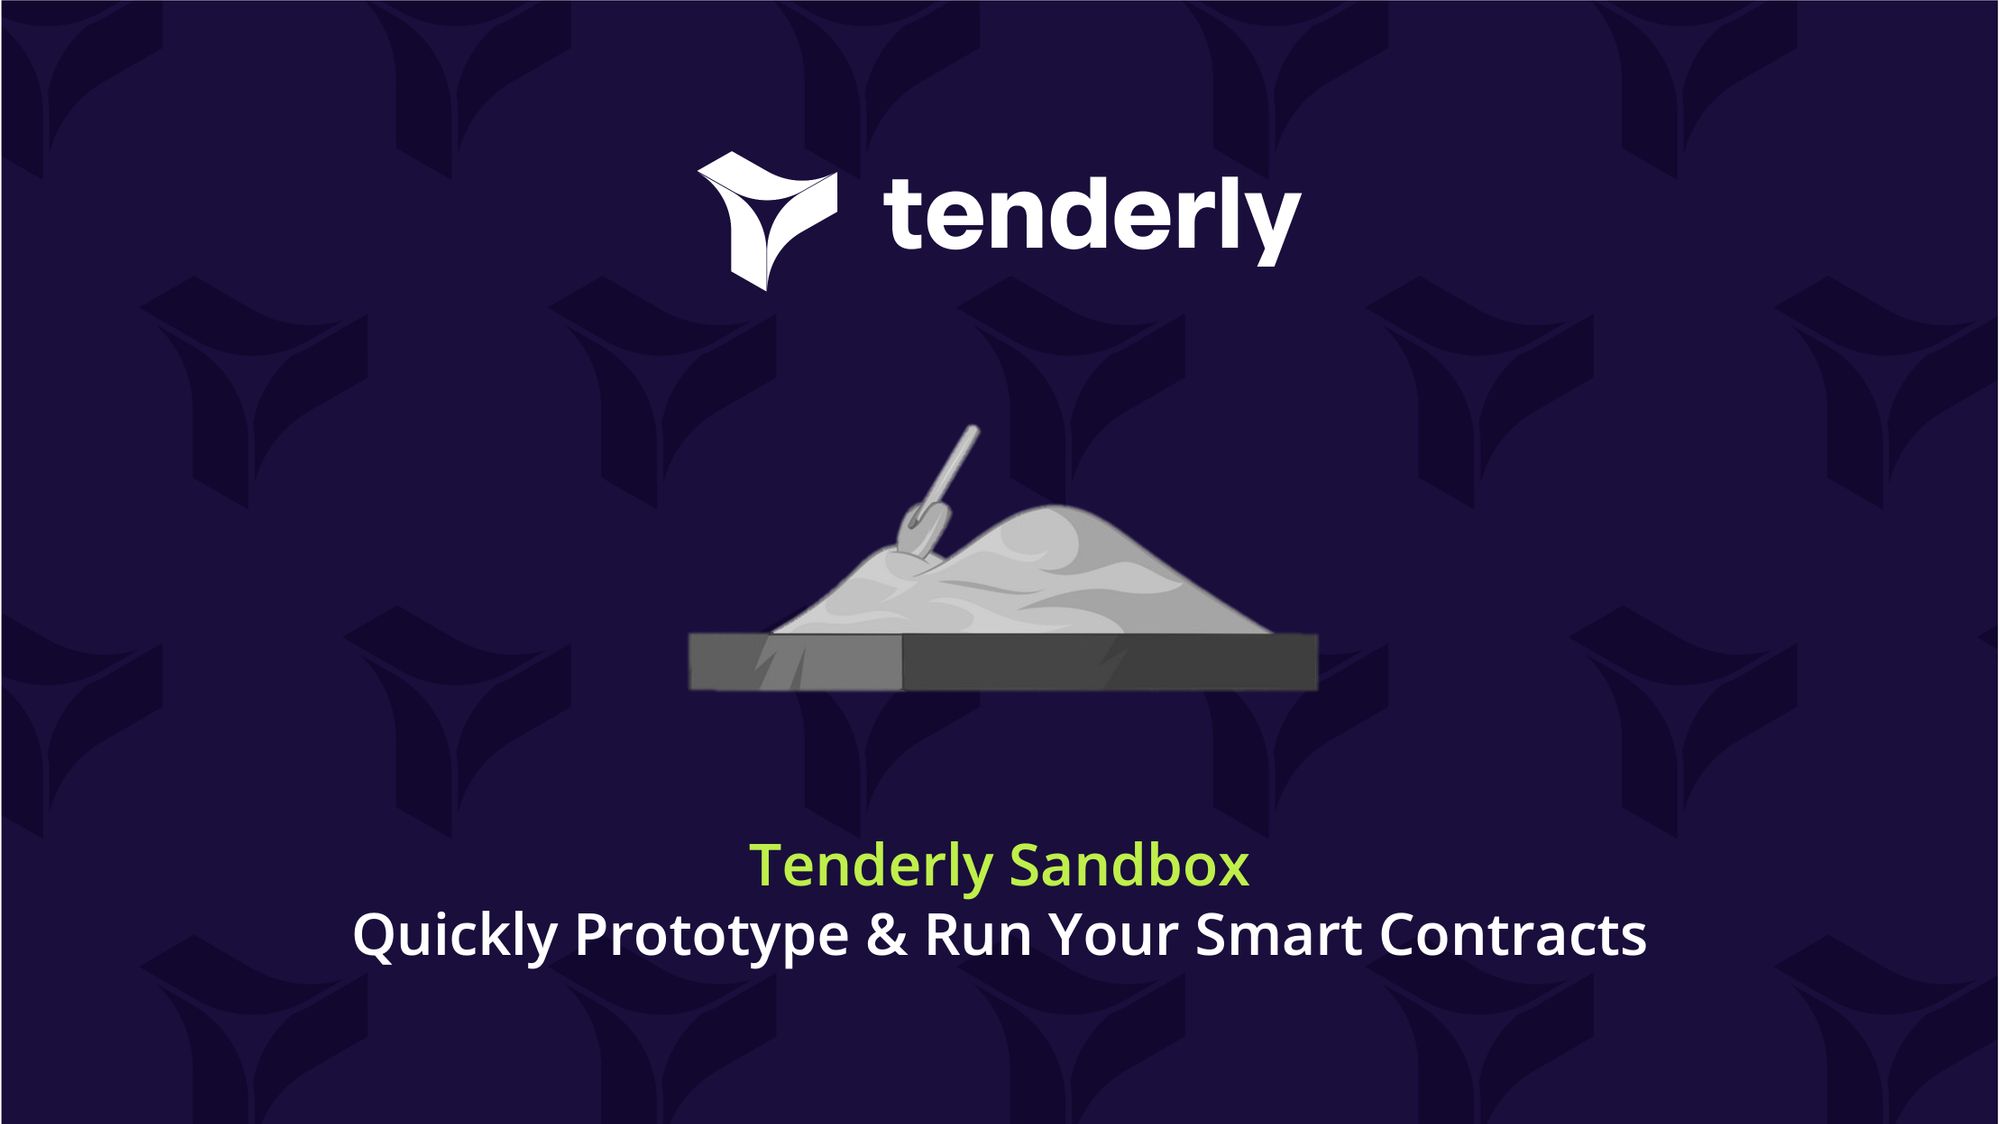 How to Use Tenderly Sandbox to Quickly Prototype & Run Your Smart Contract